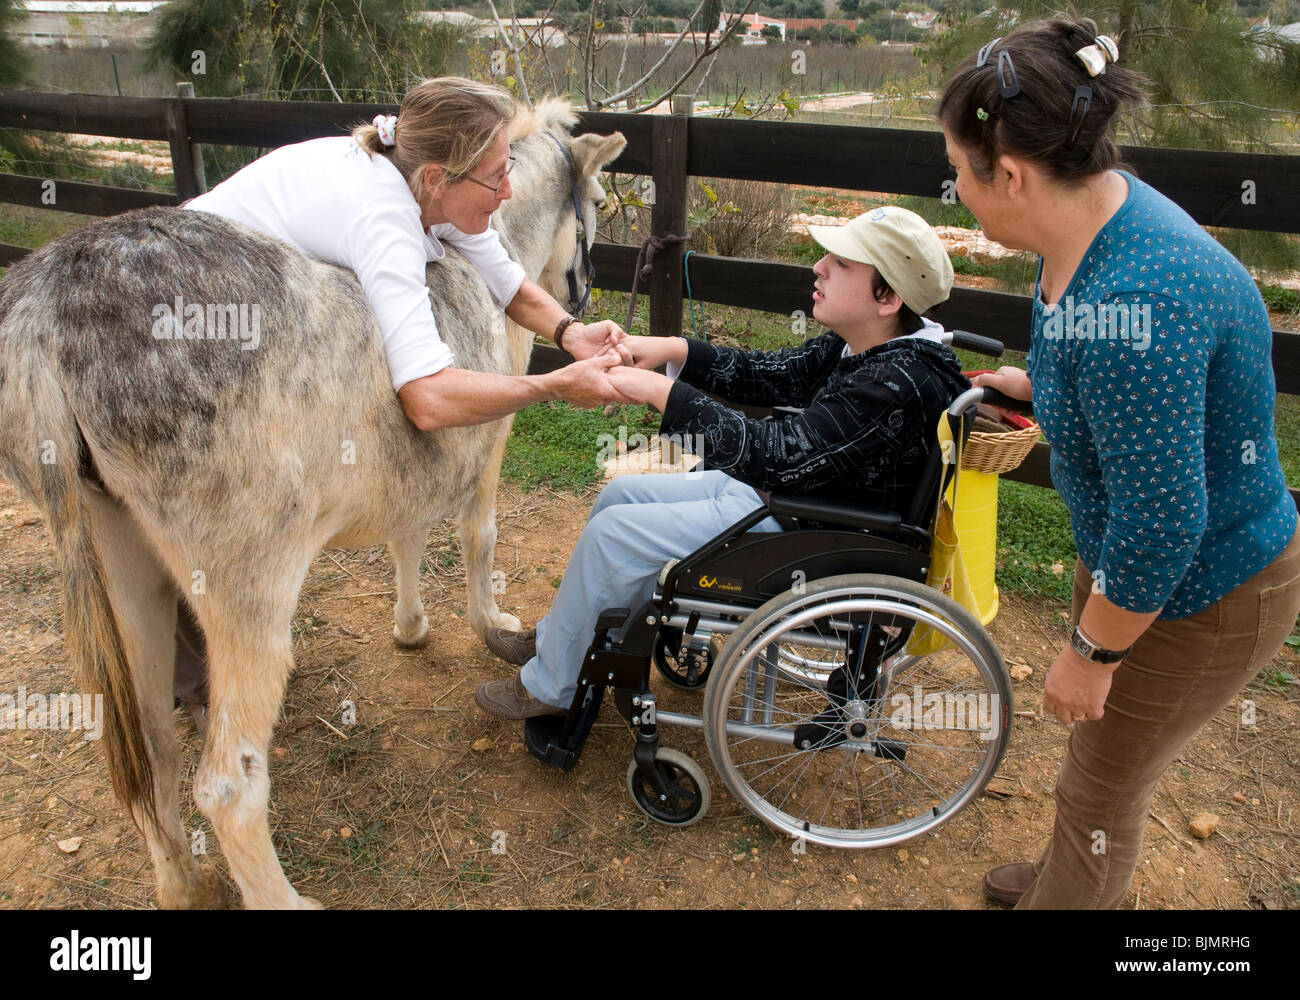 A disabled teenaged boy in a wheelchair receiving asinotherapy - donkey therapy - at a stable staffed by qualified therapists. Stock Photo